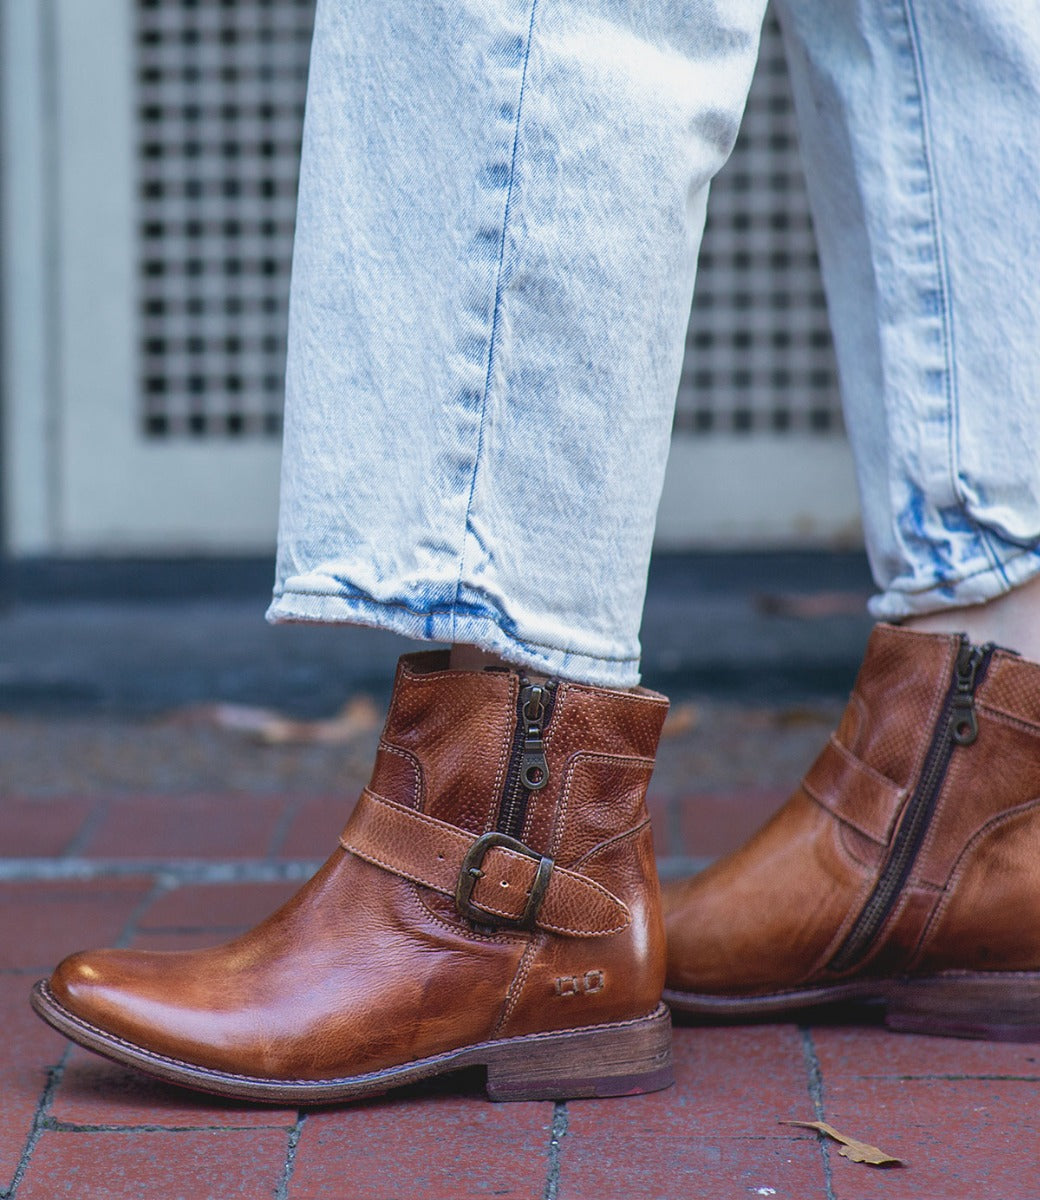 A woman wearing a pair of Bed Stu Becca tan leather boots.